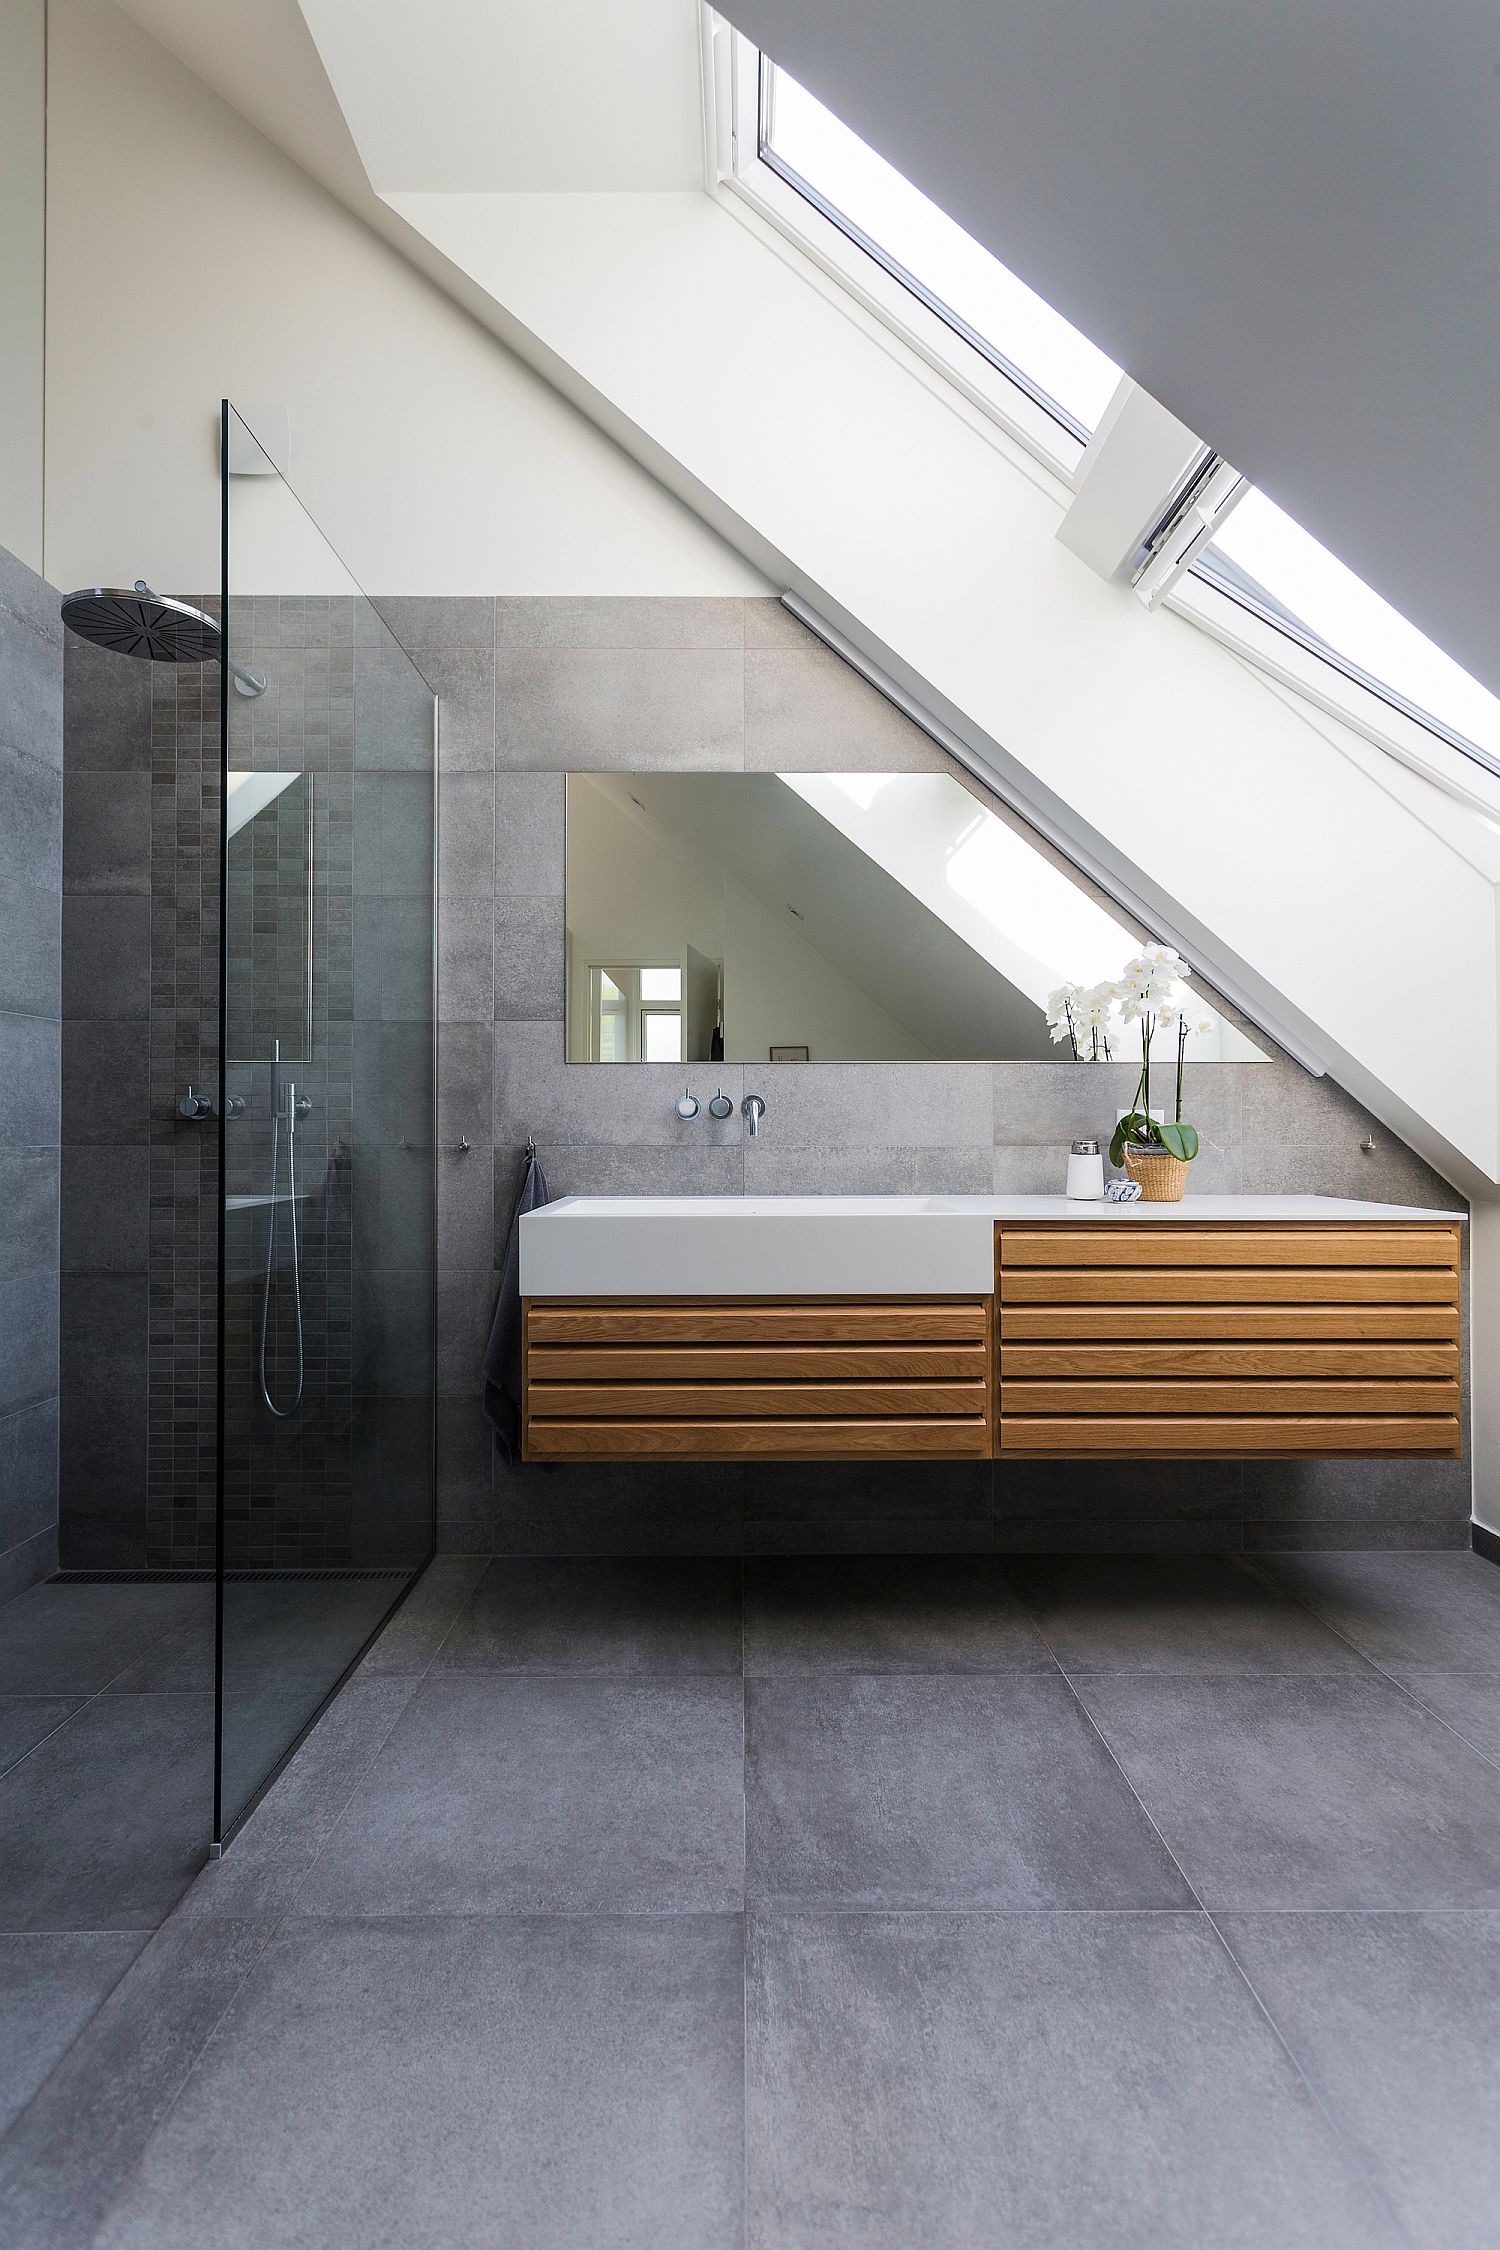 Contemporay-bathroom-with-angular-ceiling-and-ample-natural-light